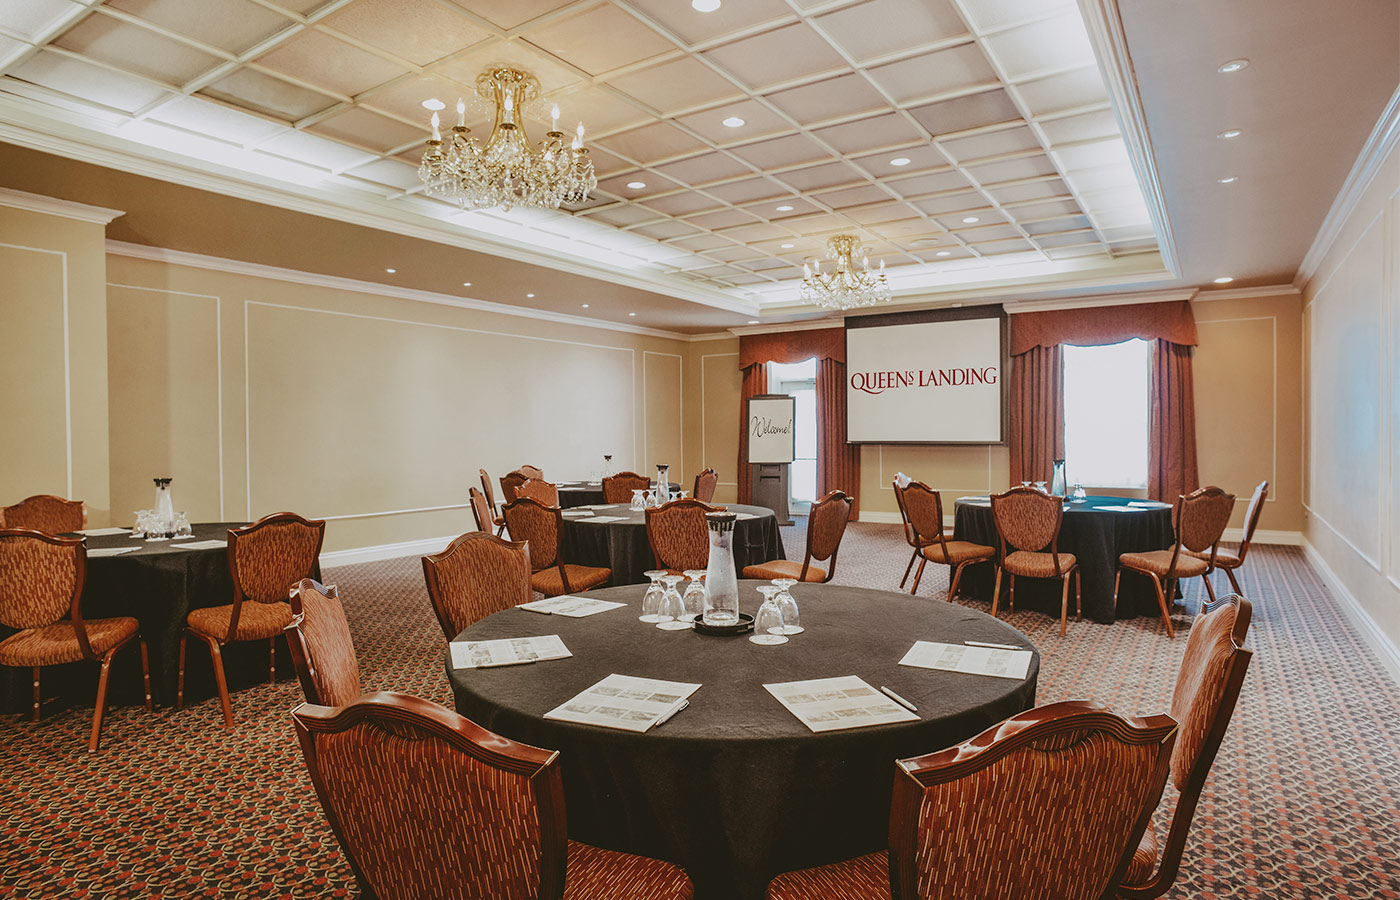 Tips for pandemic event planners from Vintage Hotels